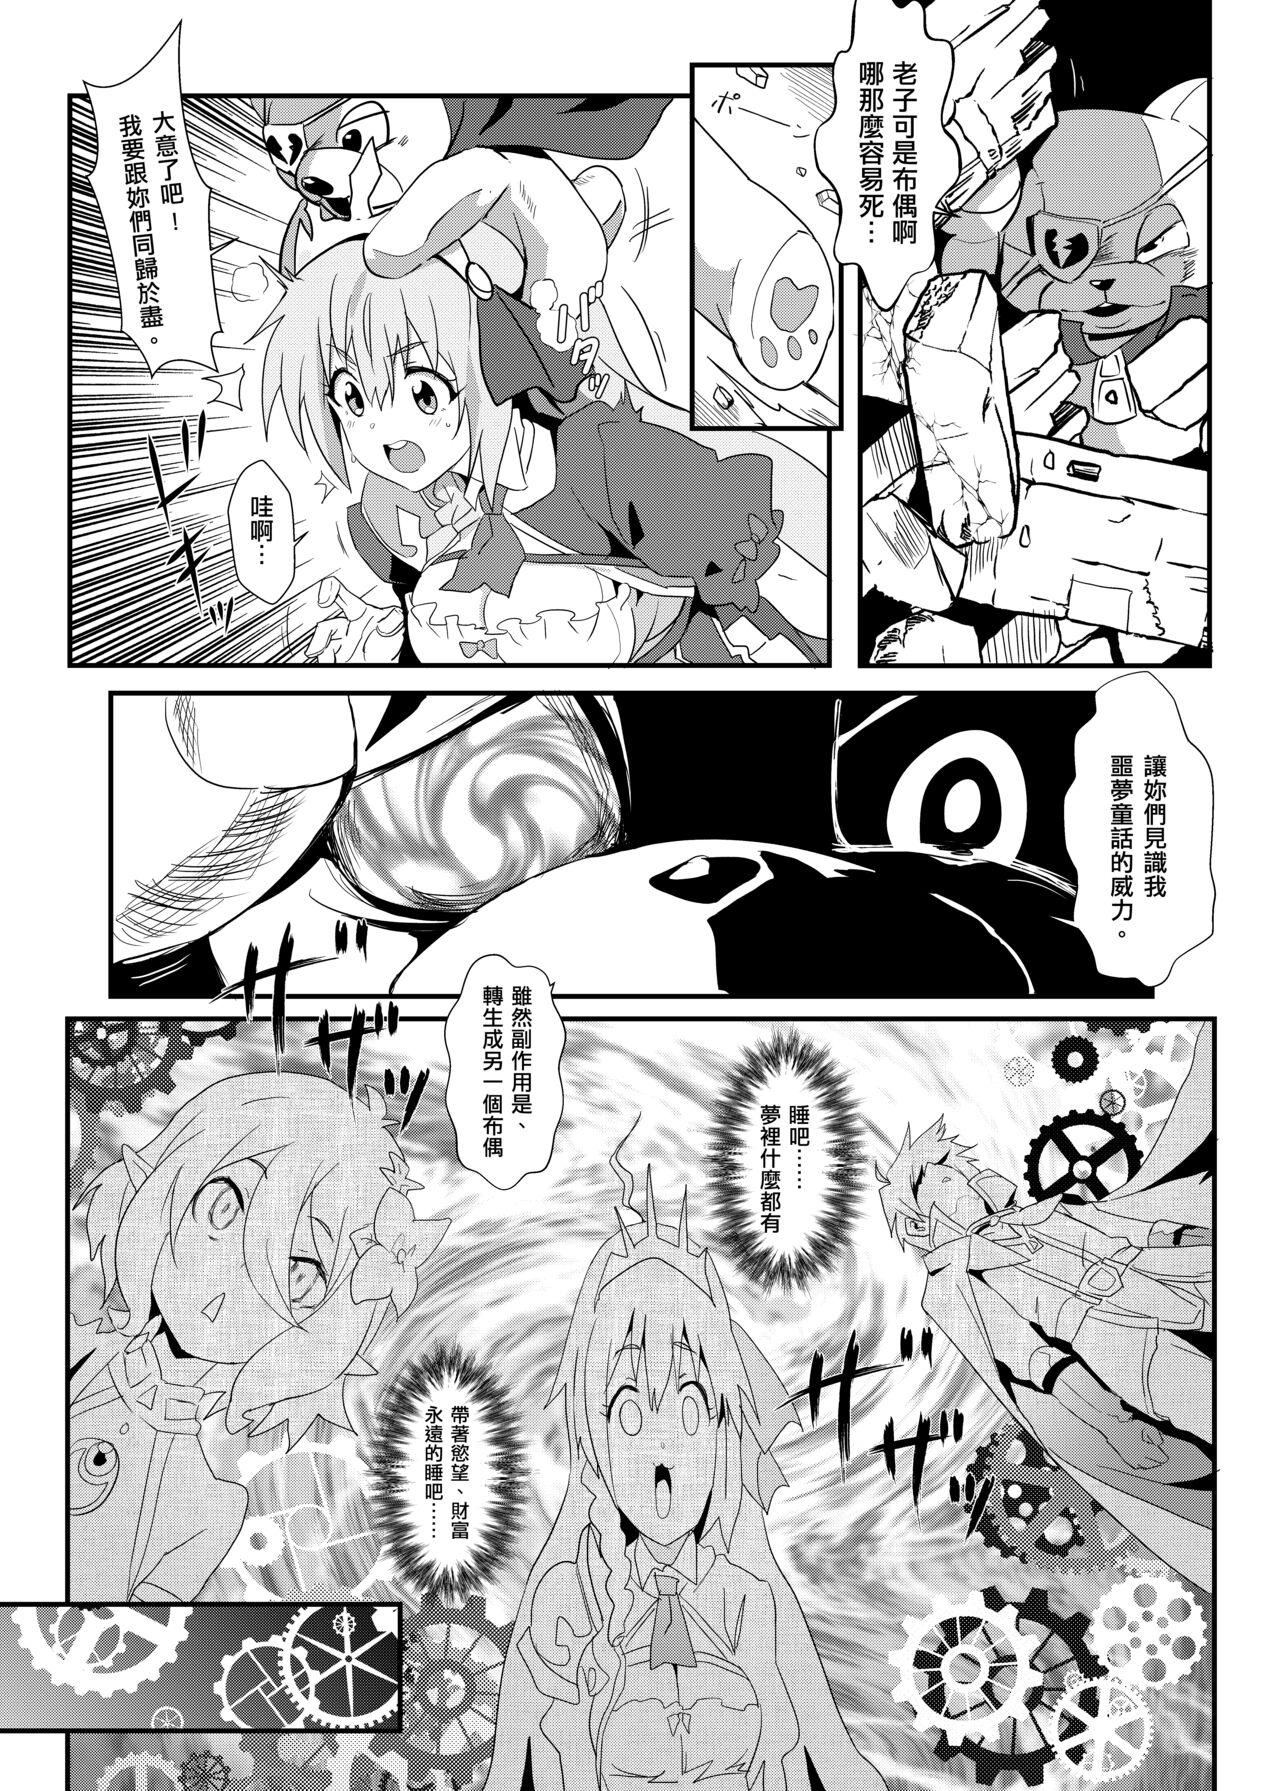 Missionary princess rice - Princess connect Uncensored - Page 10